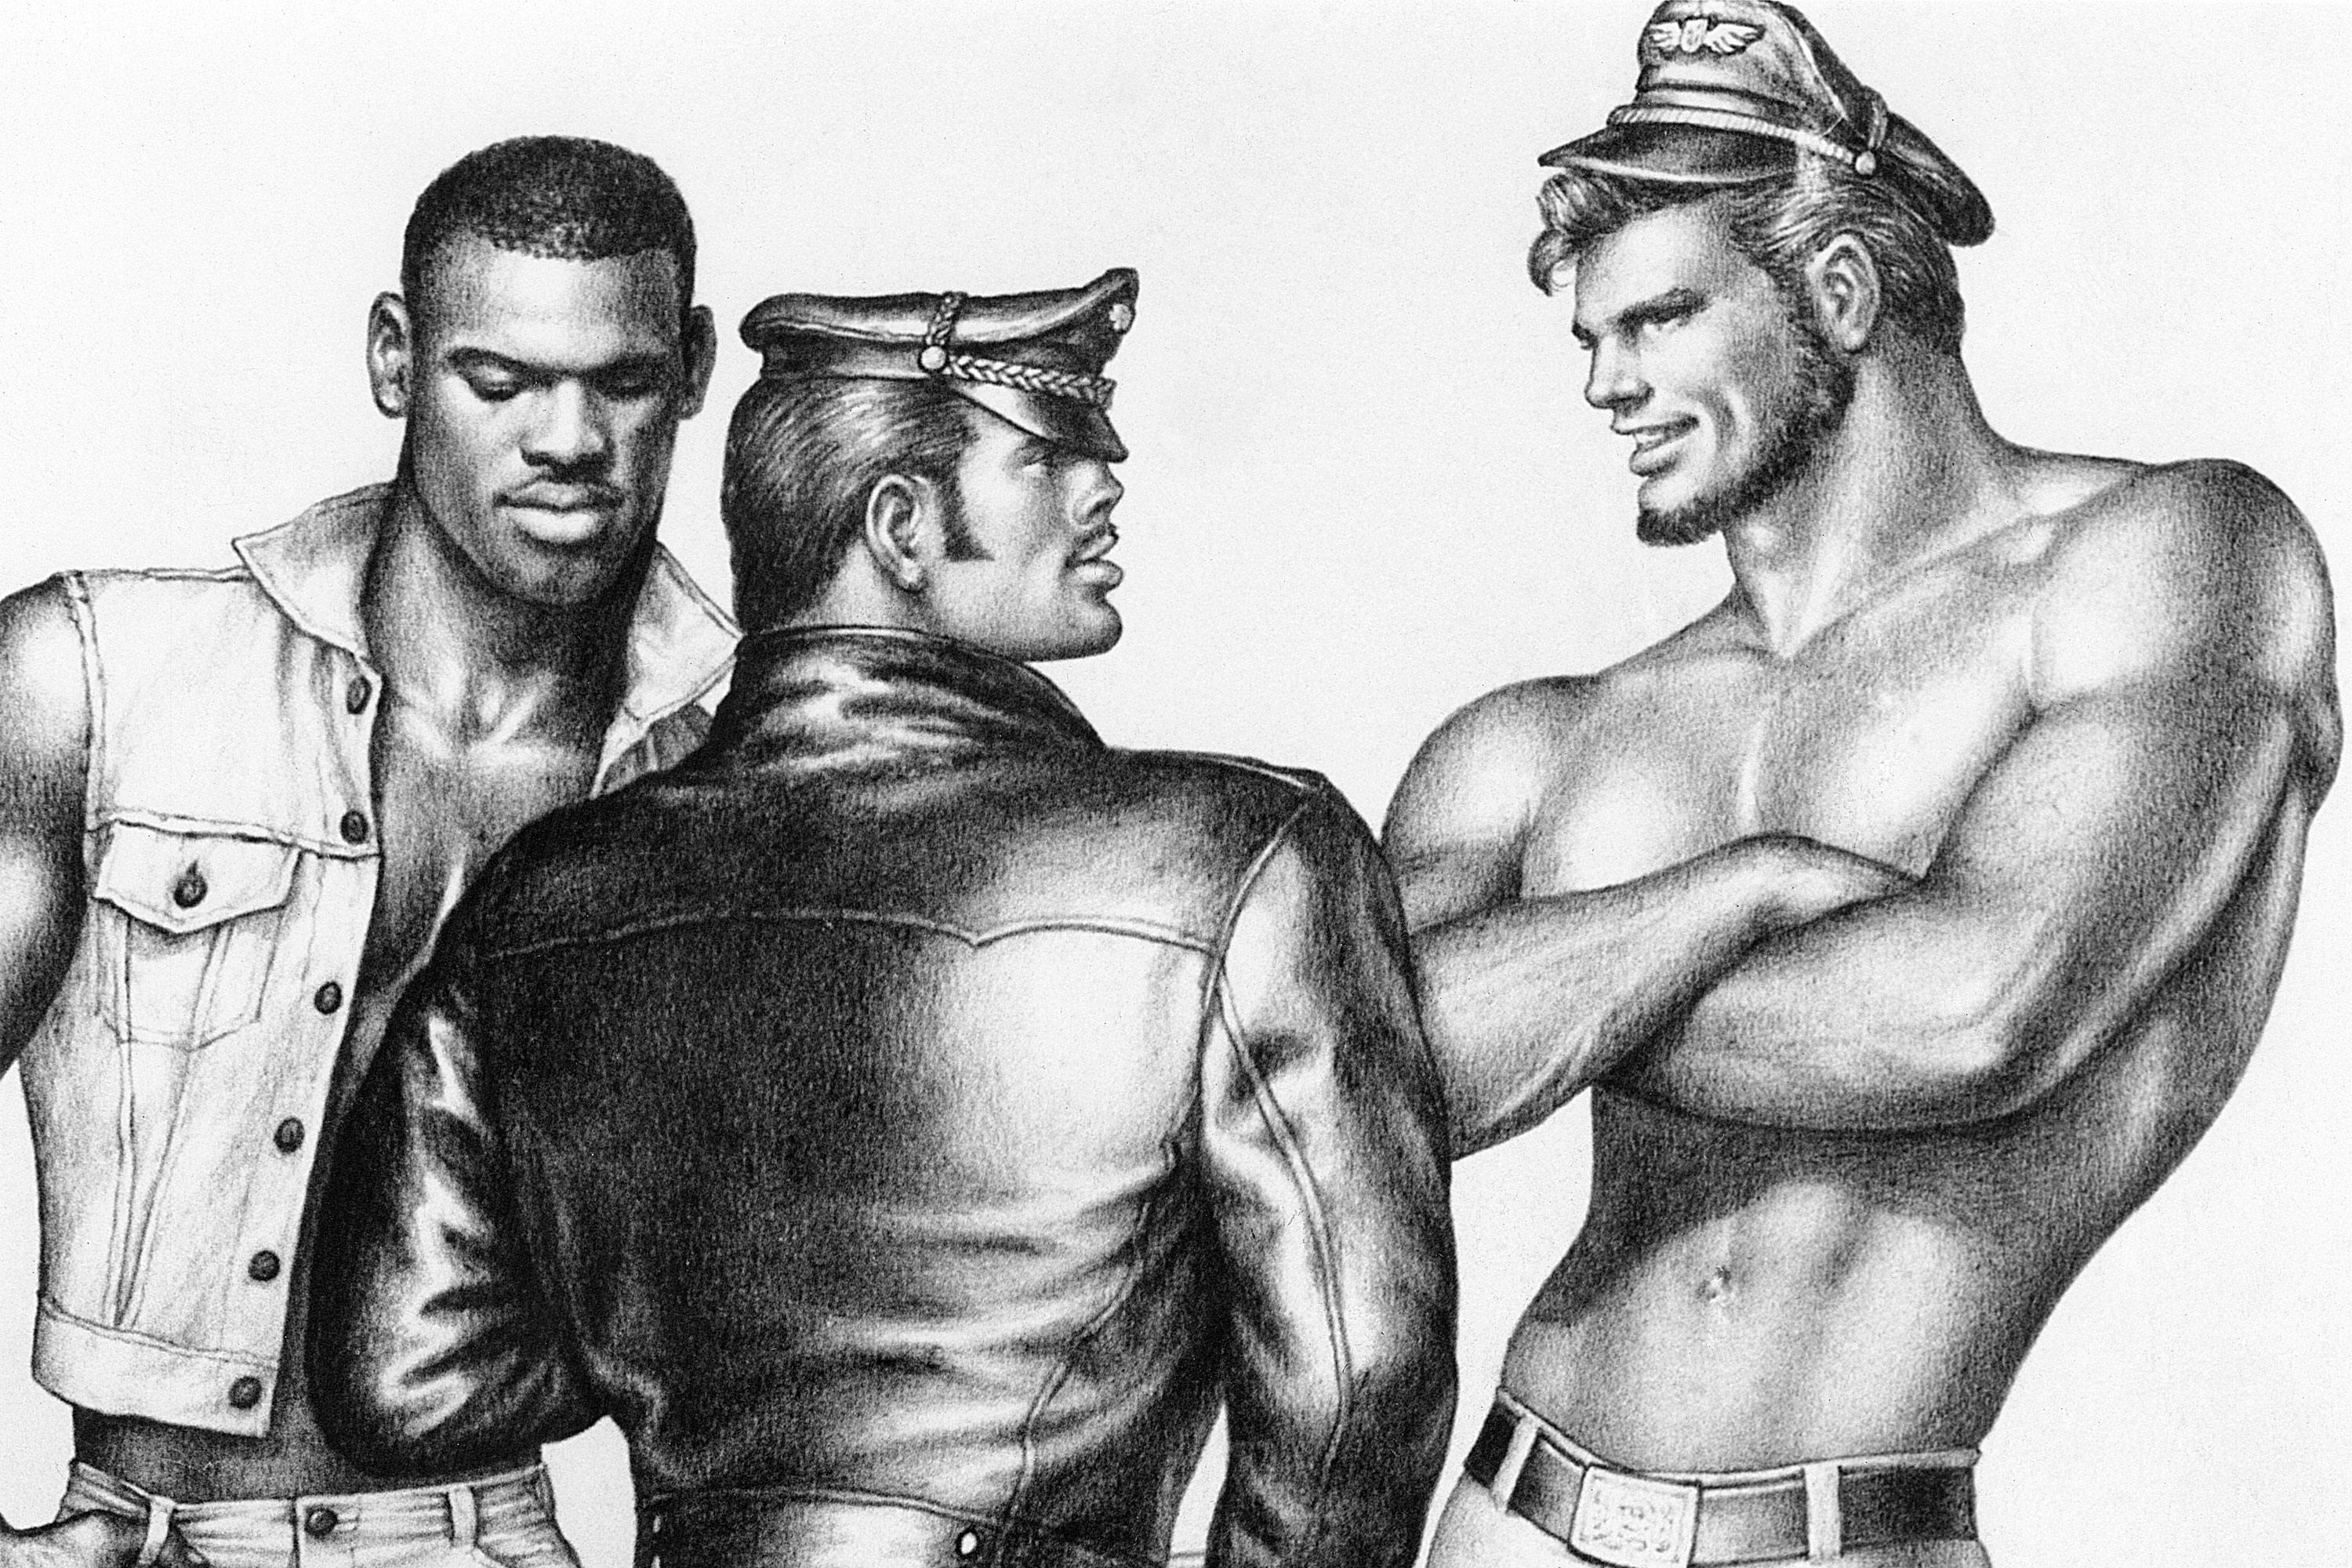 A detailed pencil drawing of a trio of muscular men wearing revealing leather and denim fetish wear